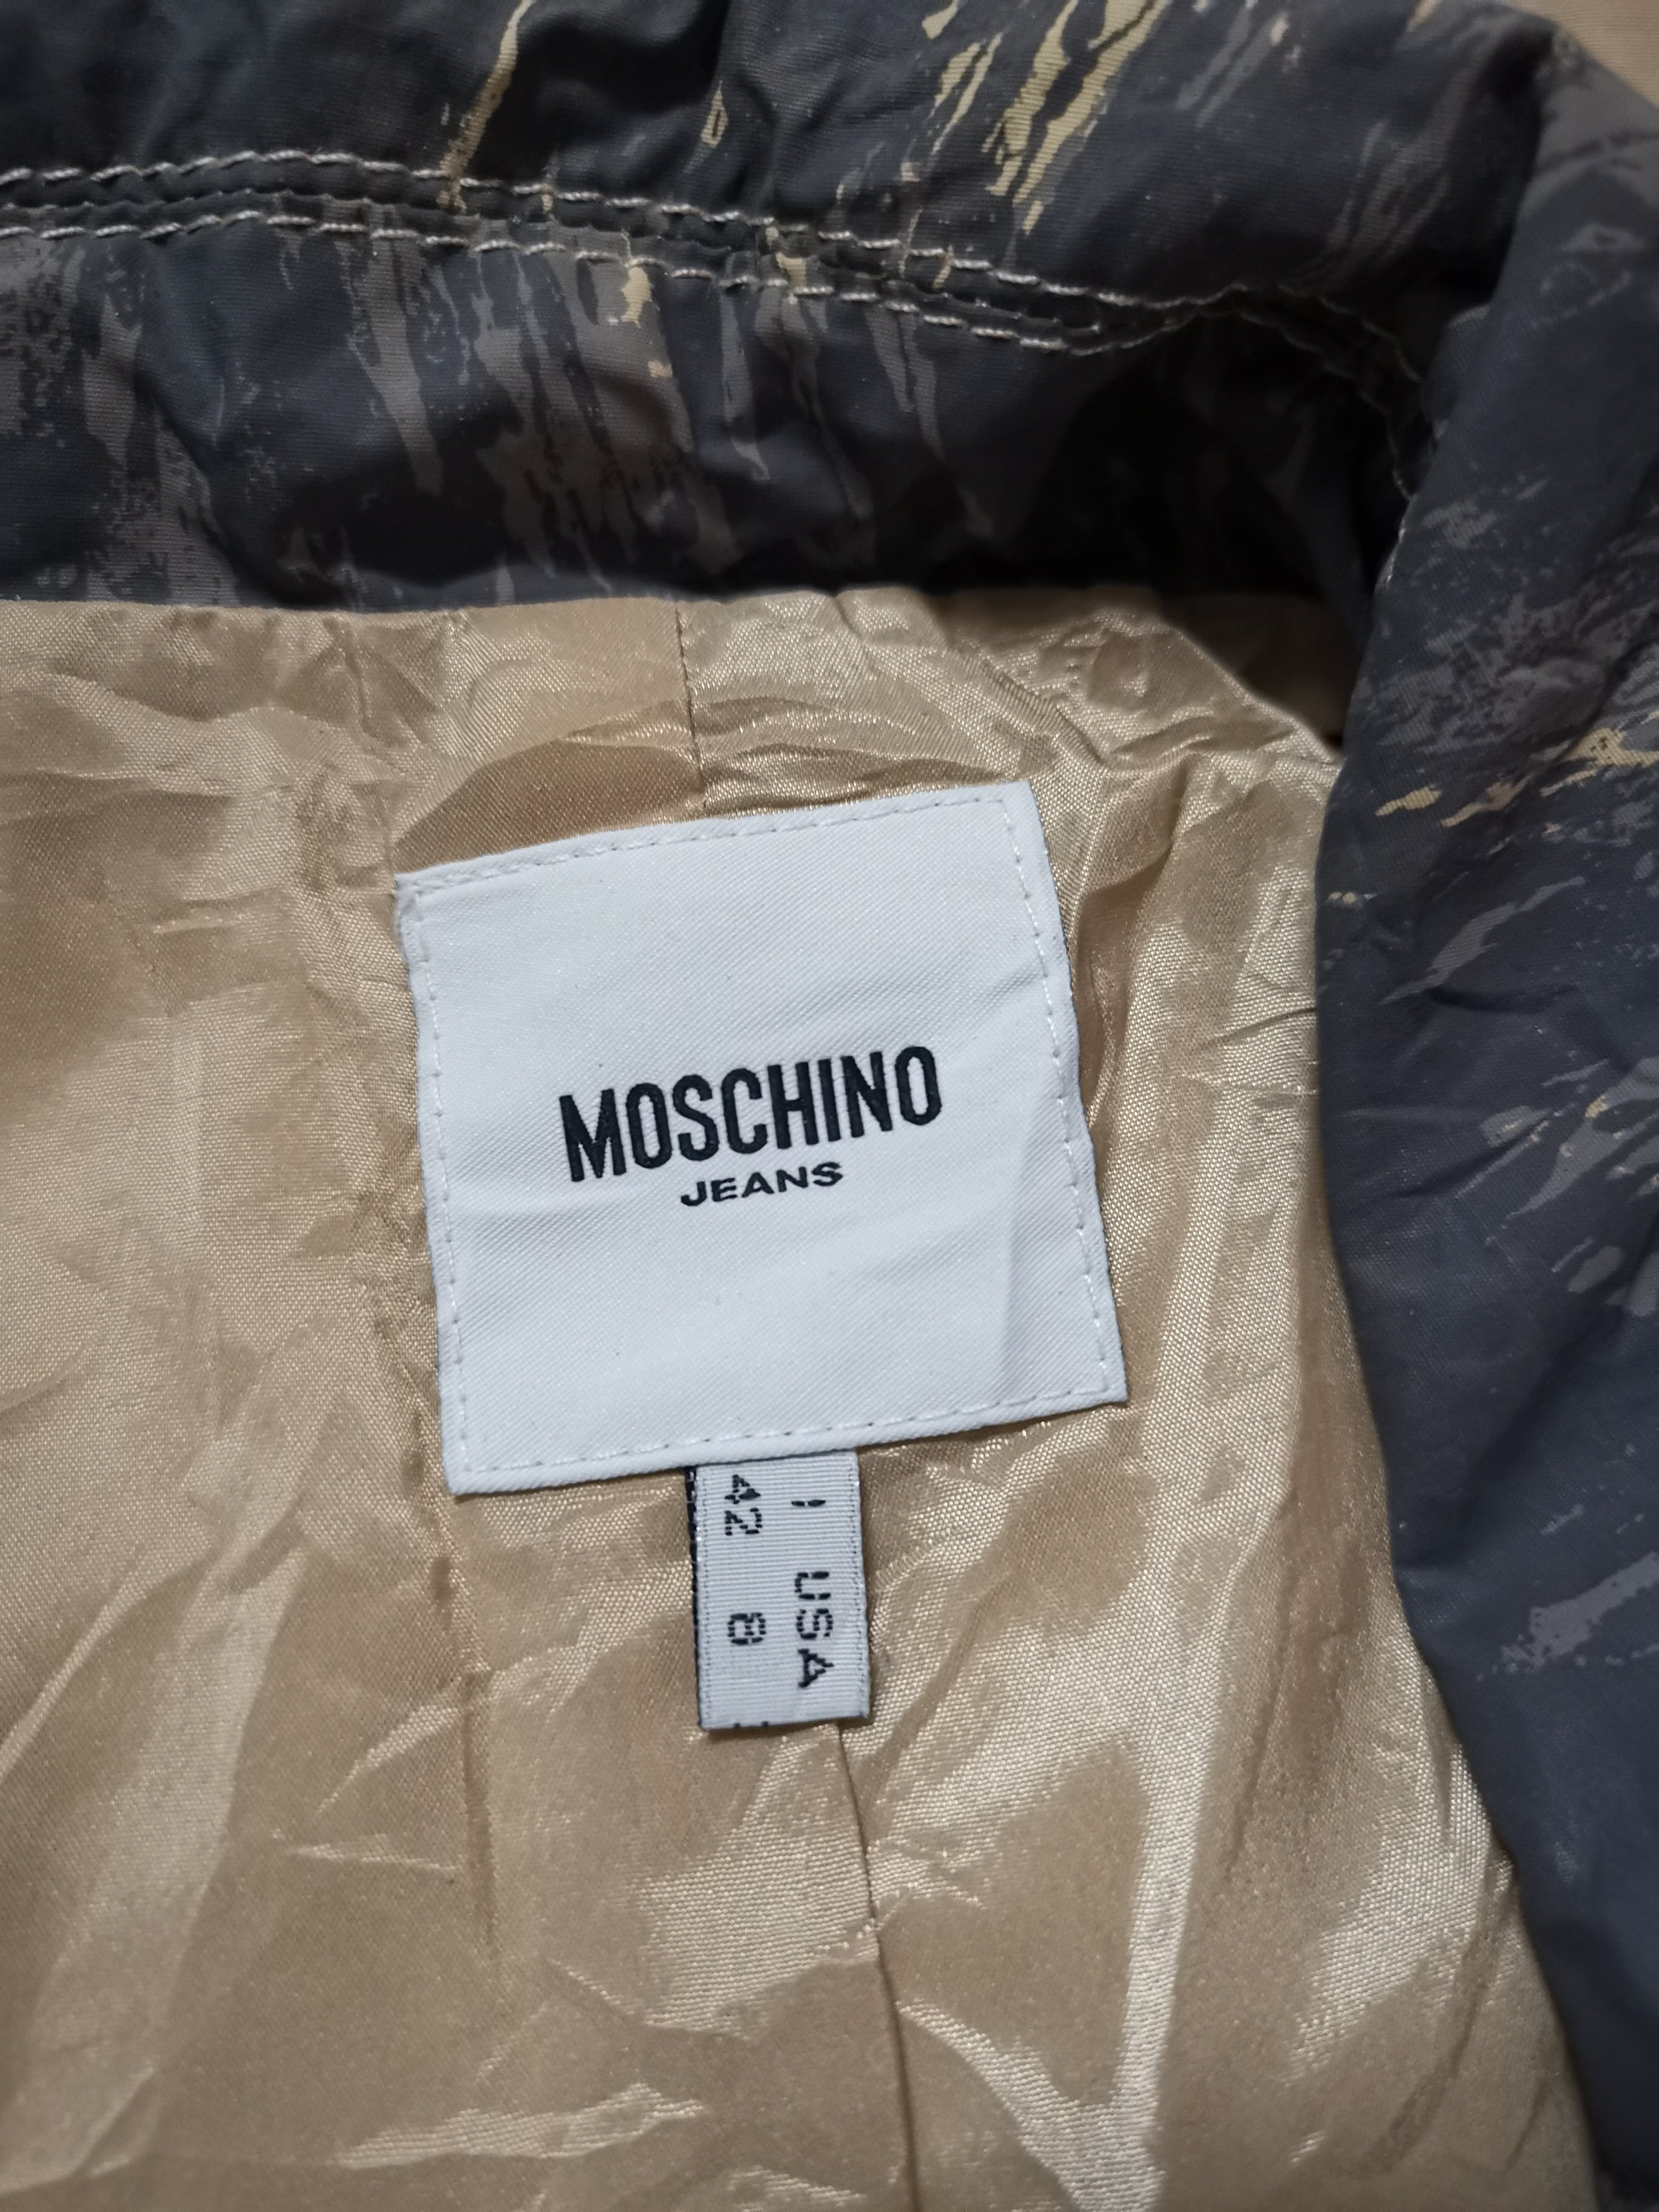 Moschino Jeans Suit @ Blazers - 6